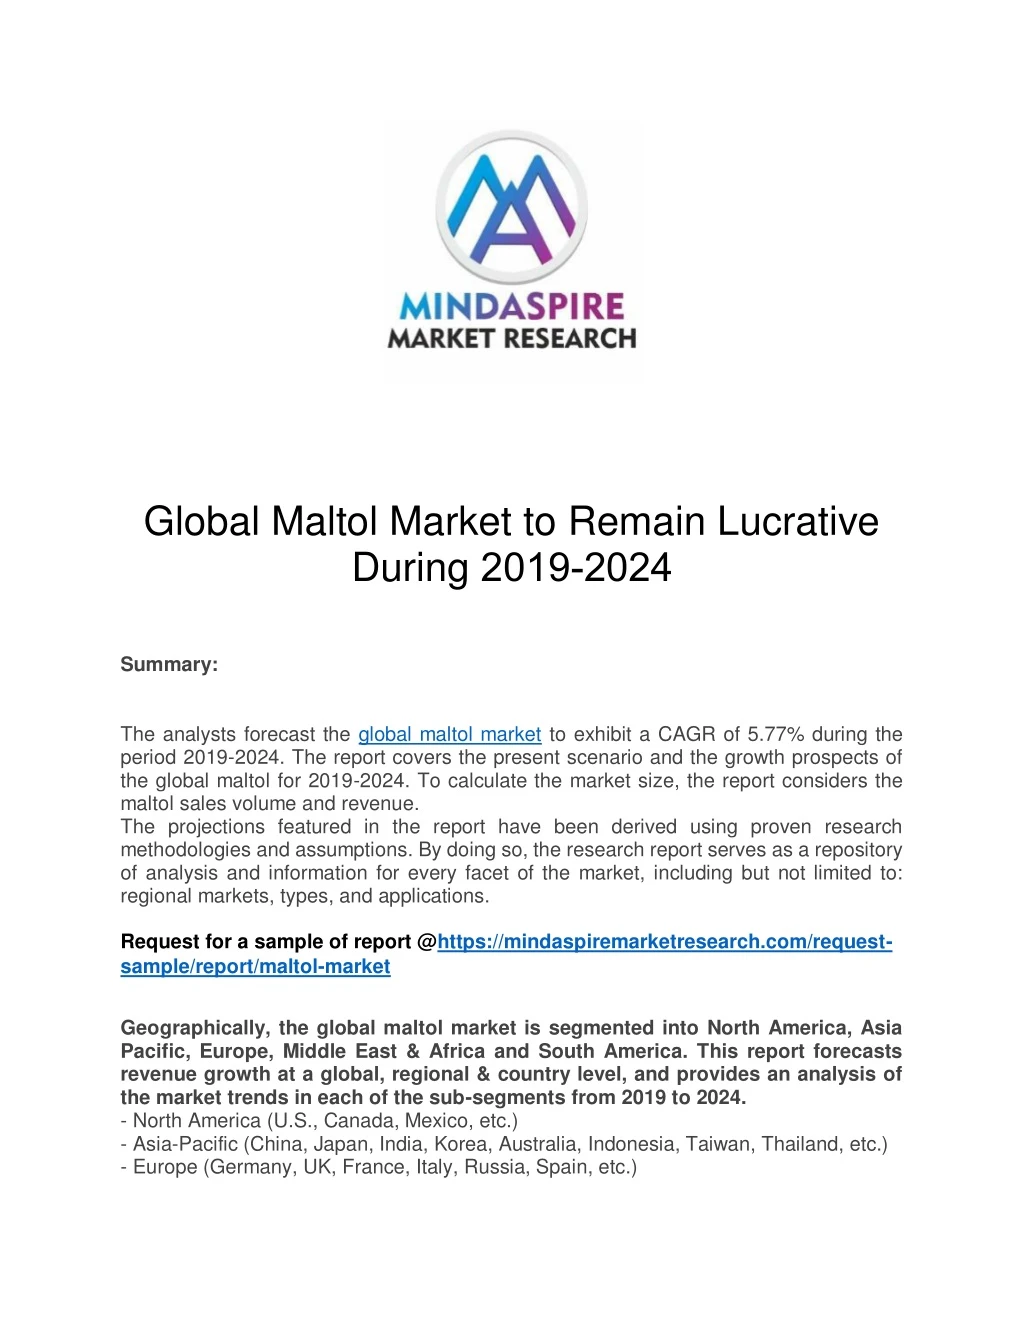 global maltol market to remain lucrative during